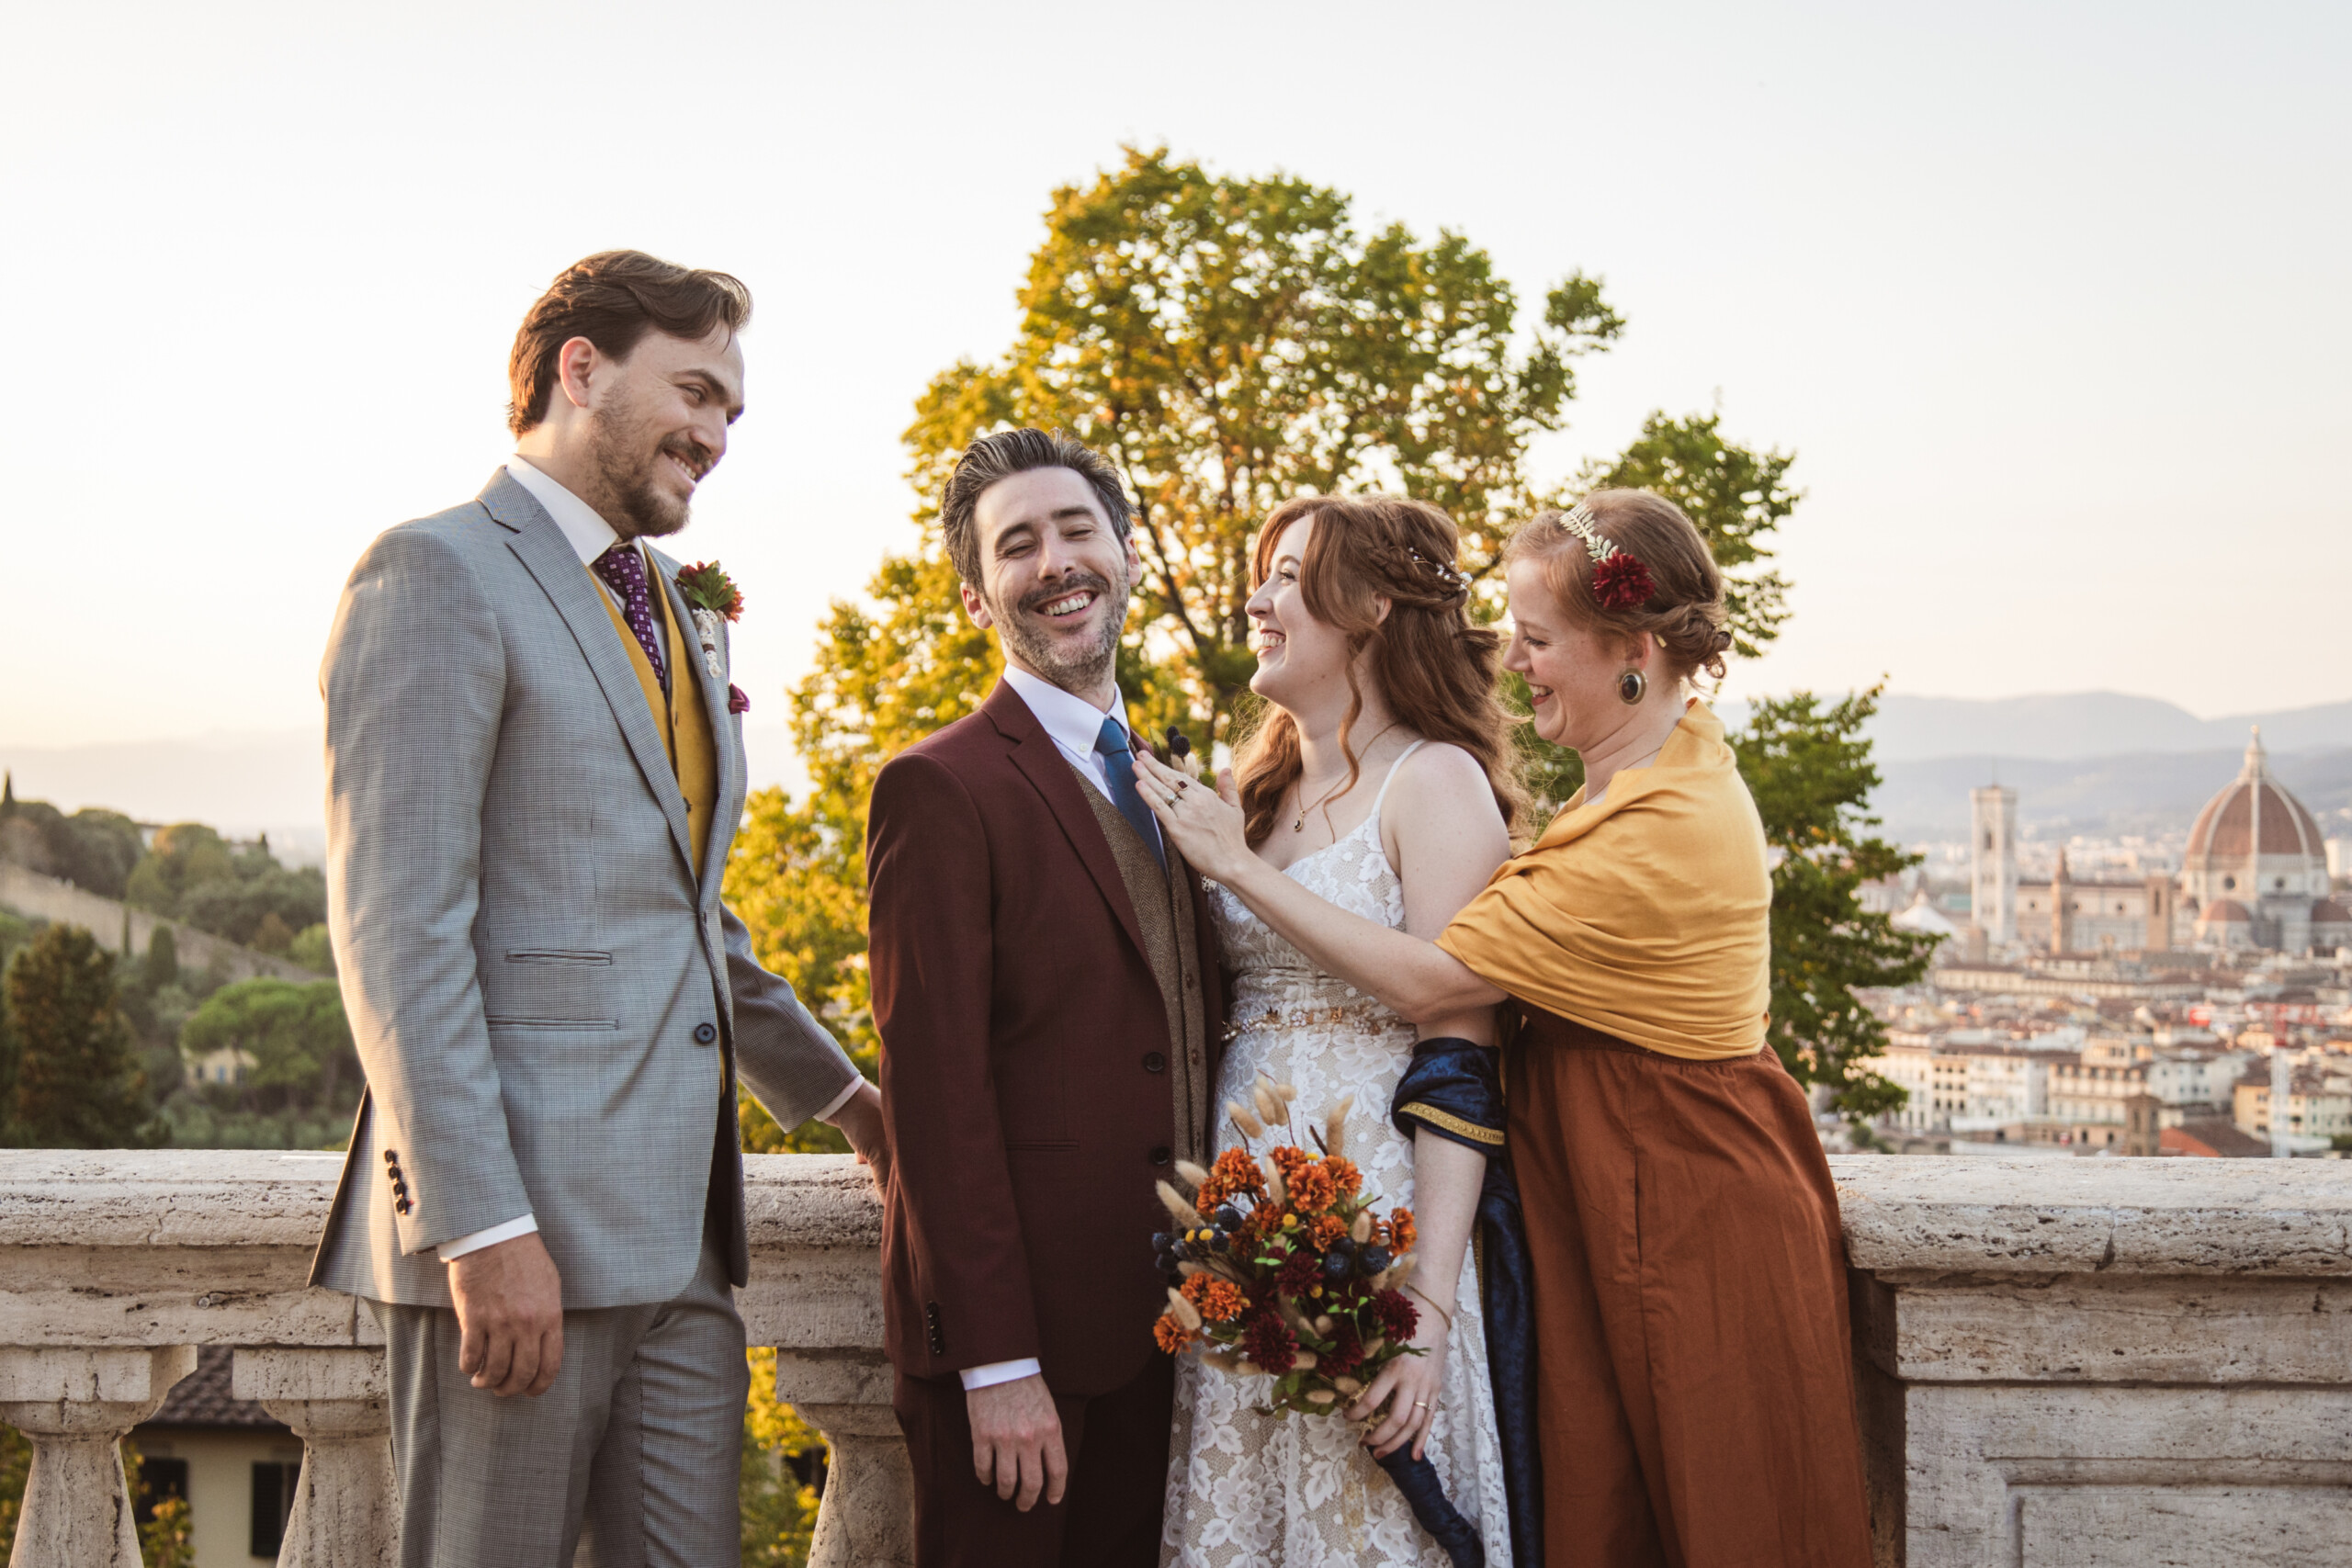 Wedding photoshoot by Angelica, Localgrapher in Florence